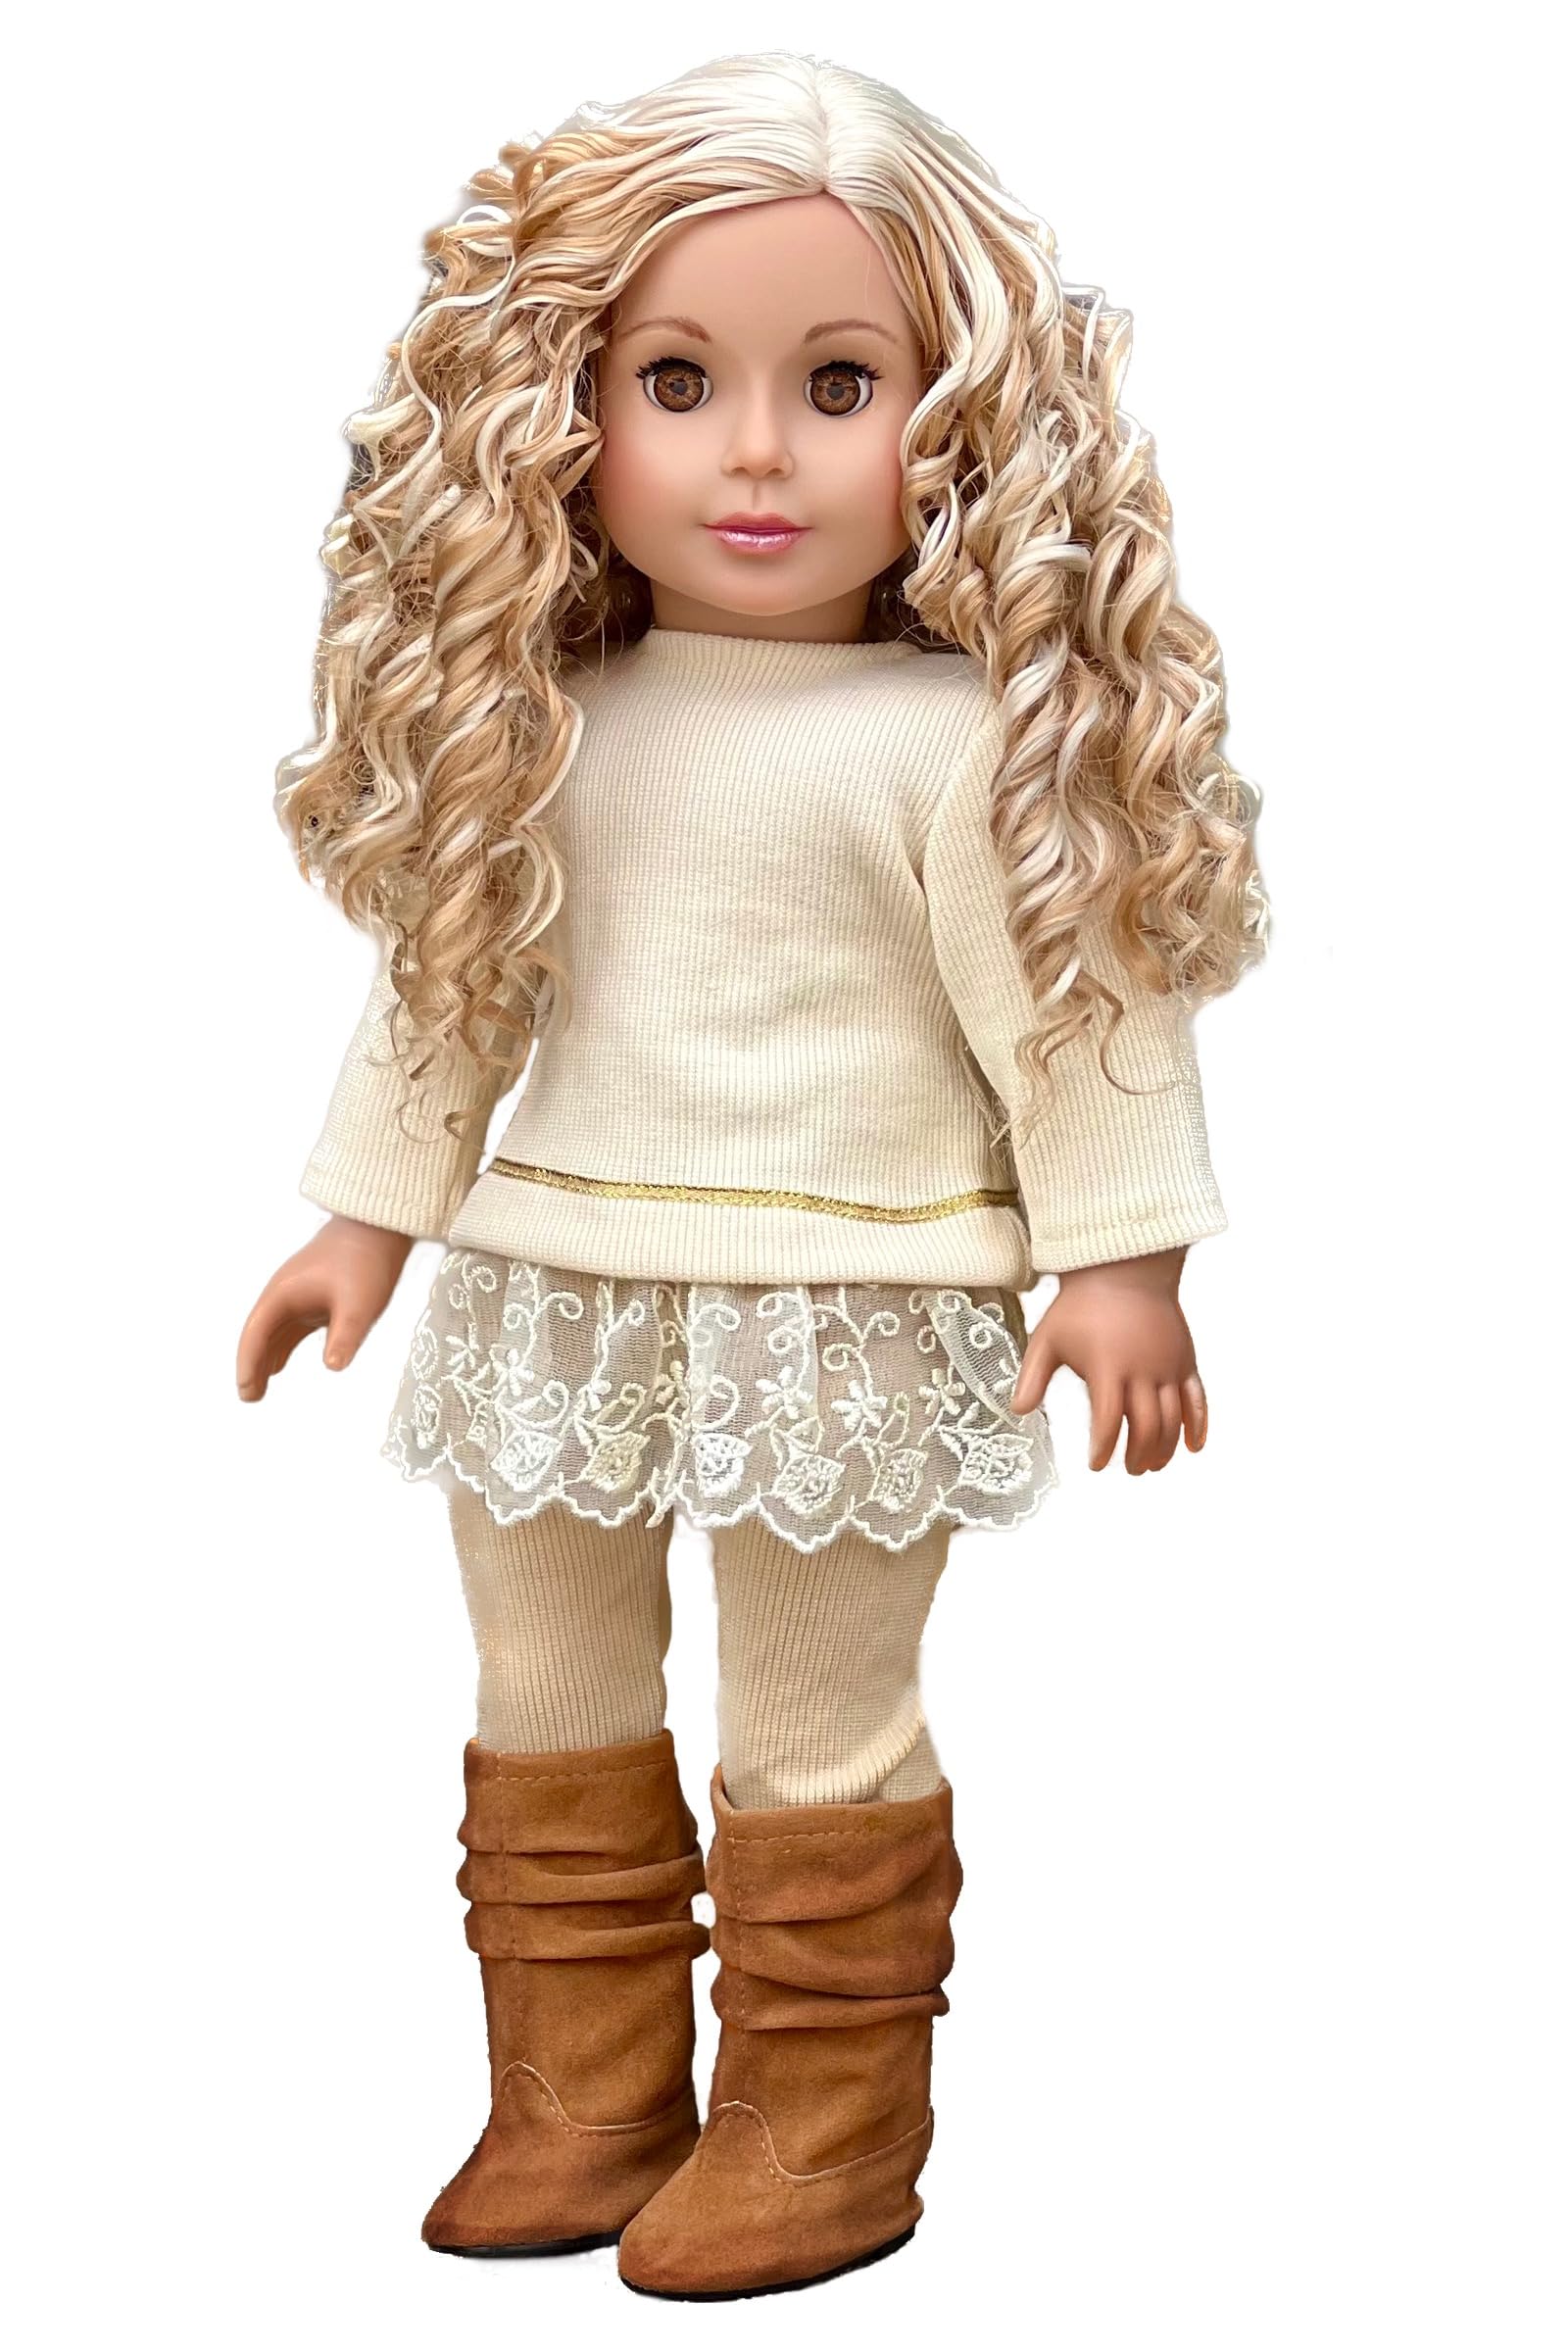 Book Cover - Romantic Melody - 3 Piece Outfit - Tunic, Leggings and Boots - Clothes Fits 18 Inch Doll (Doll Not Included)